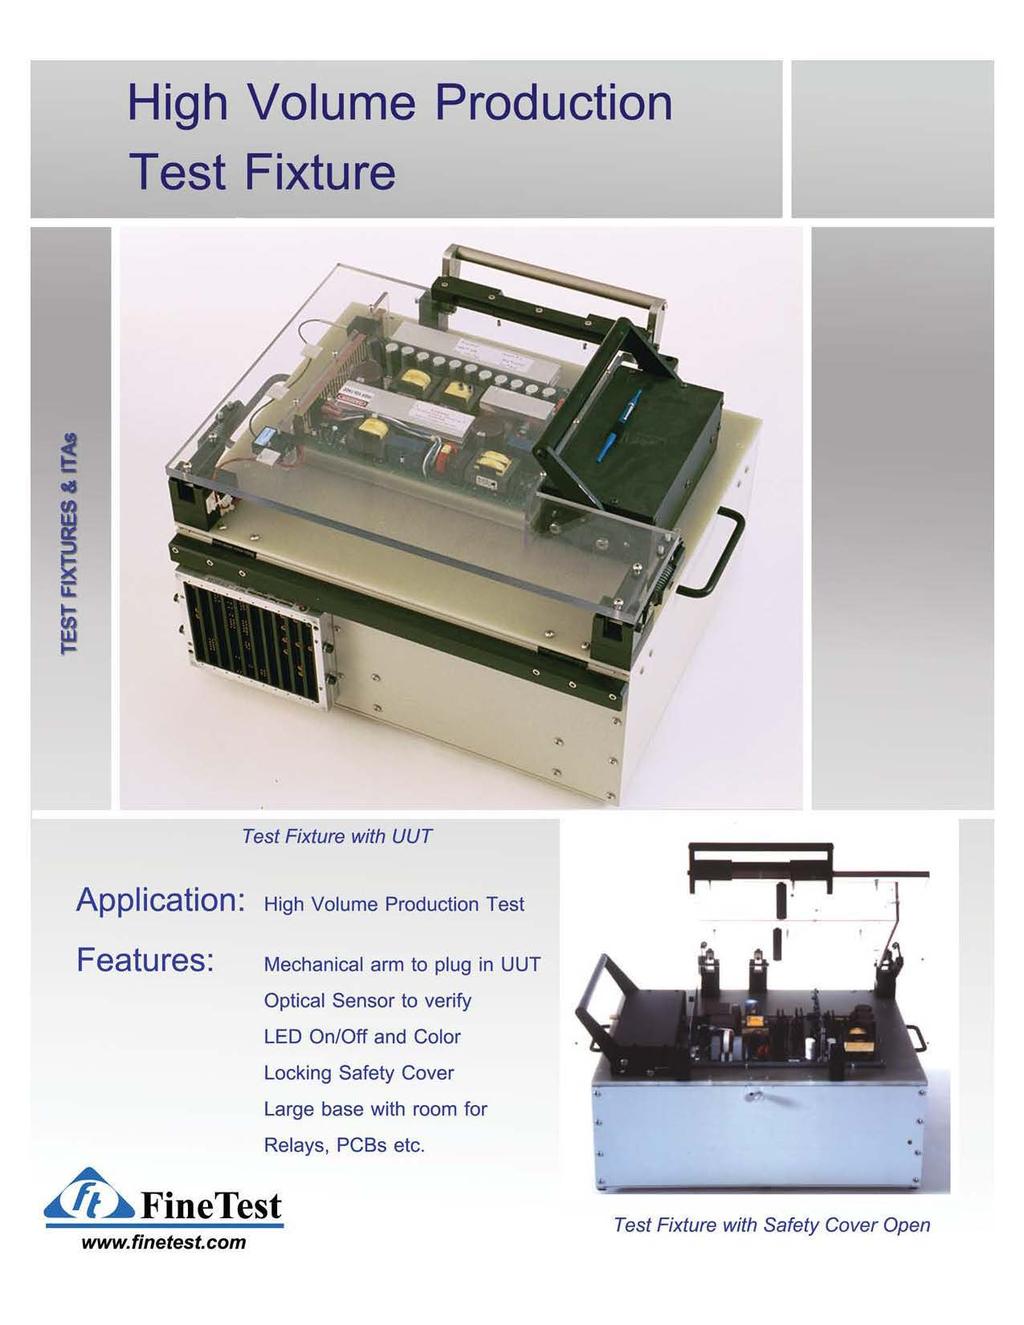 High Volume Production Test Fixture Test Fixture with UUT Application: High Volume Production Test Features: Mechanical arm to plug in UUT Optical Sensor